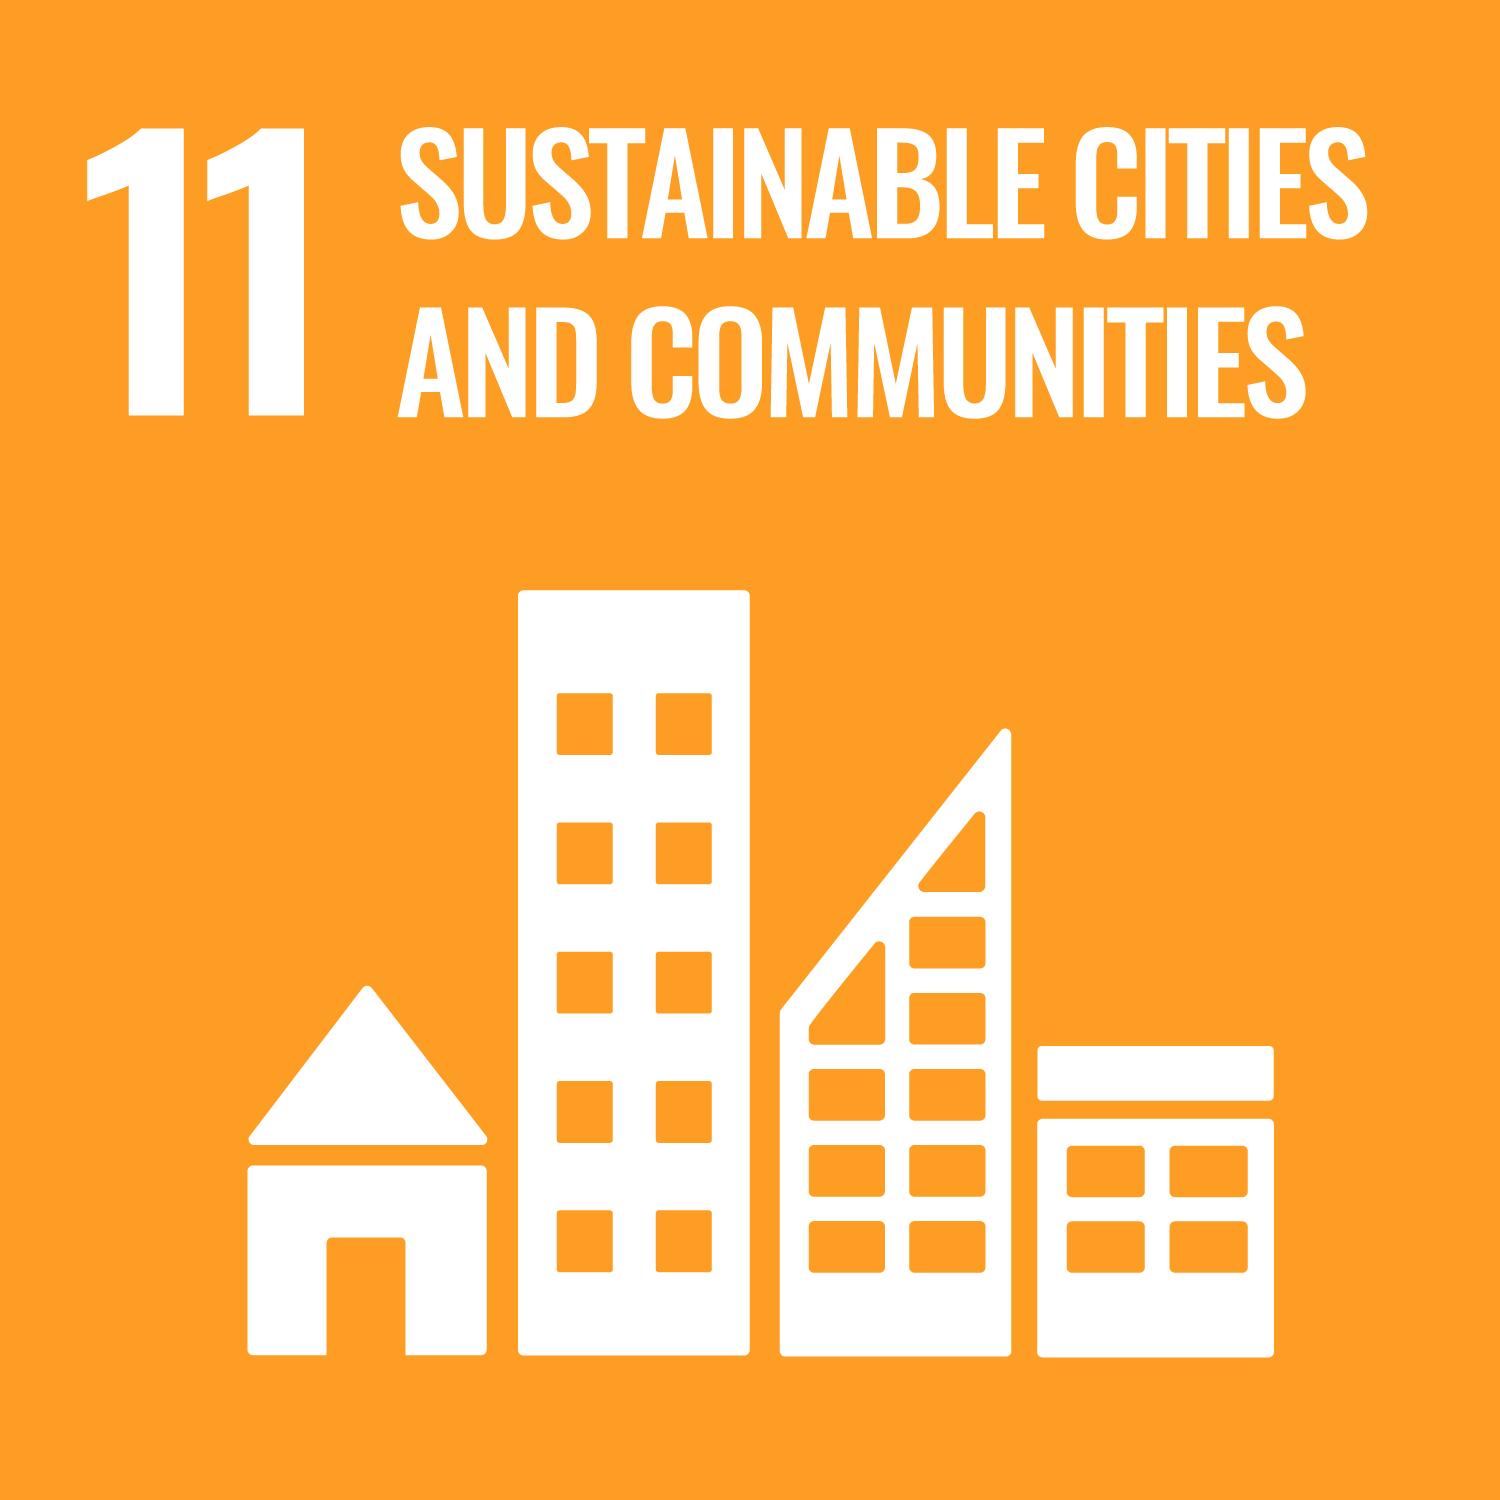 Goal Eleven:  Make cities and human settlements inclusive, safe, resilient and sustainable